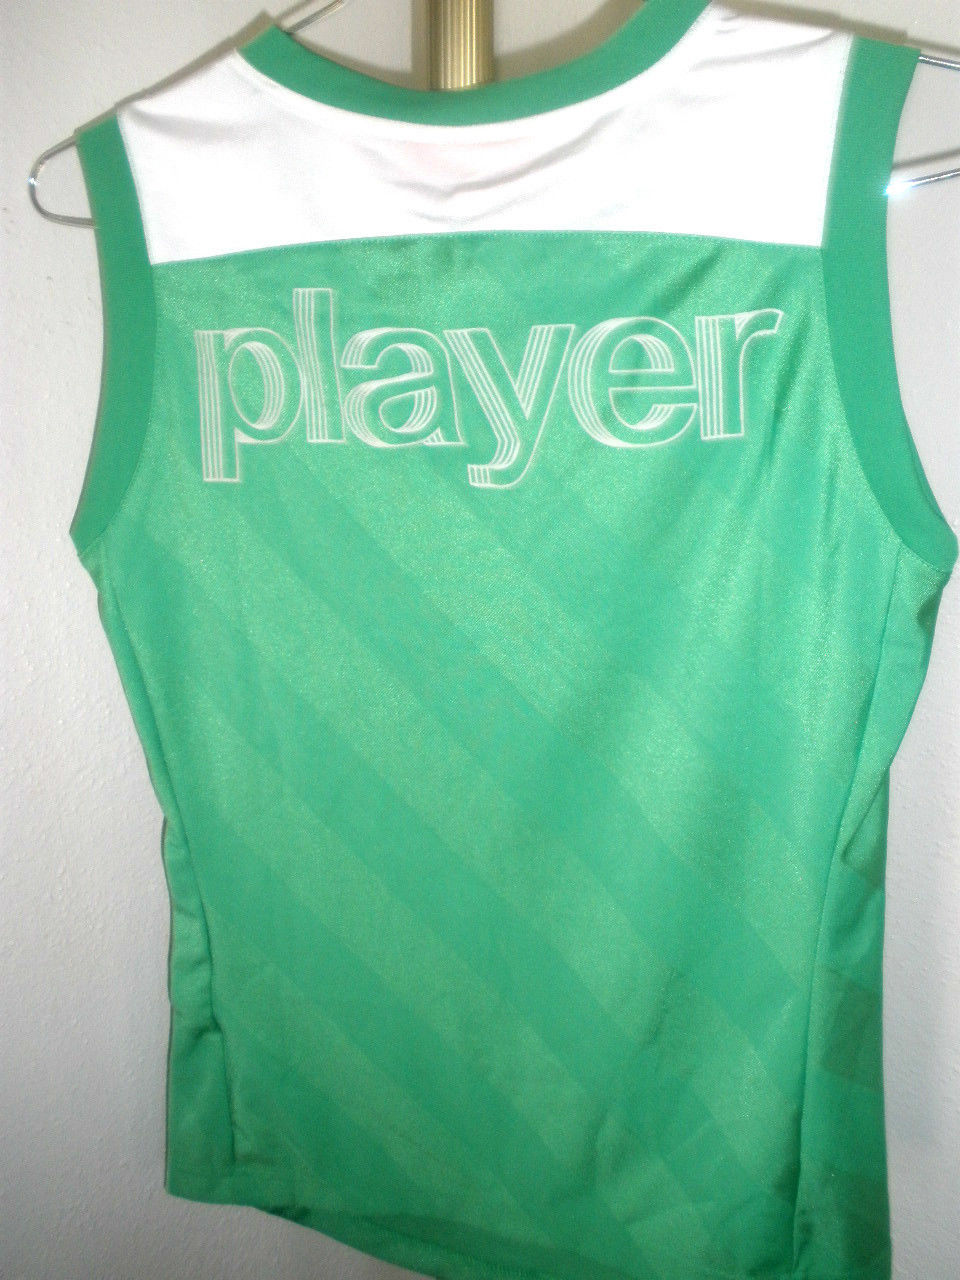 Excellent Womens Puma Soccer Sleeveless Jersey Green/White "Player" on Back Sz M - $22.76